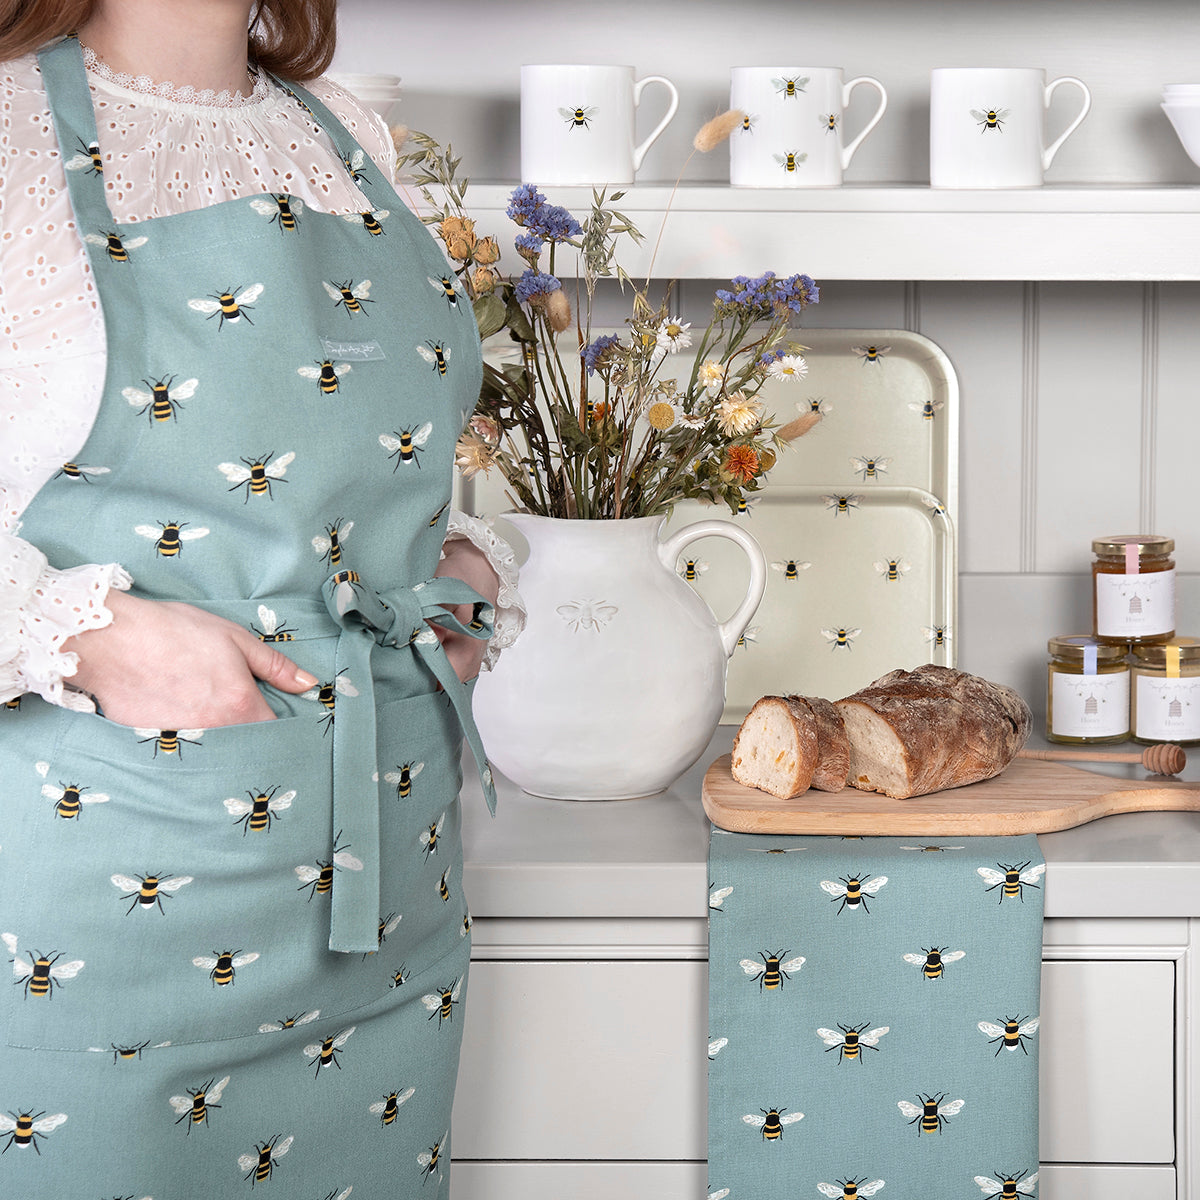 Sophie Allport Bees adult apron in teal design. Perfect gift idea for bee lovers